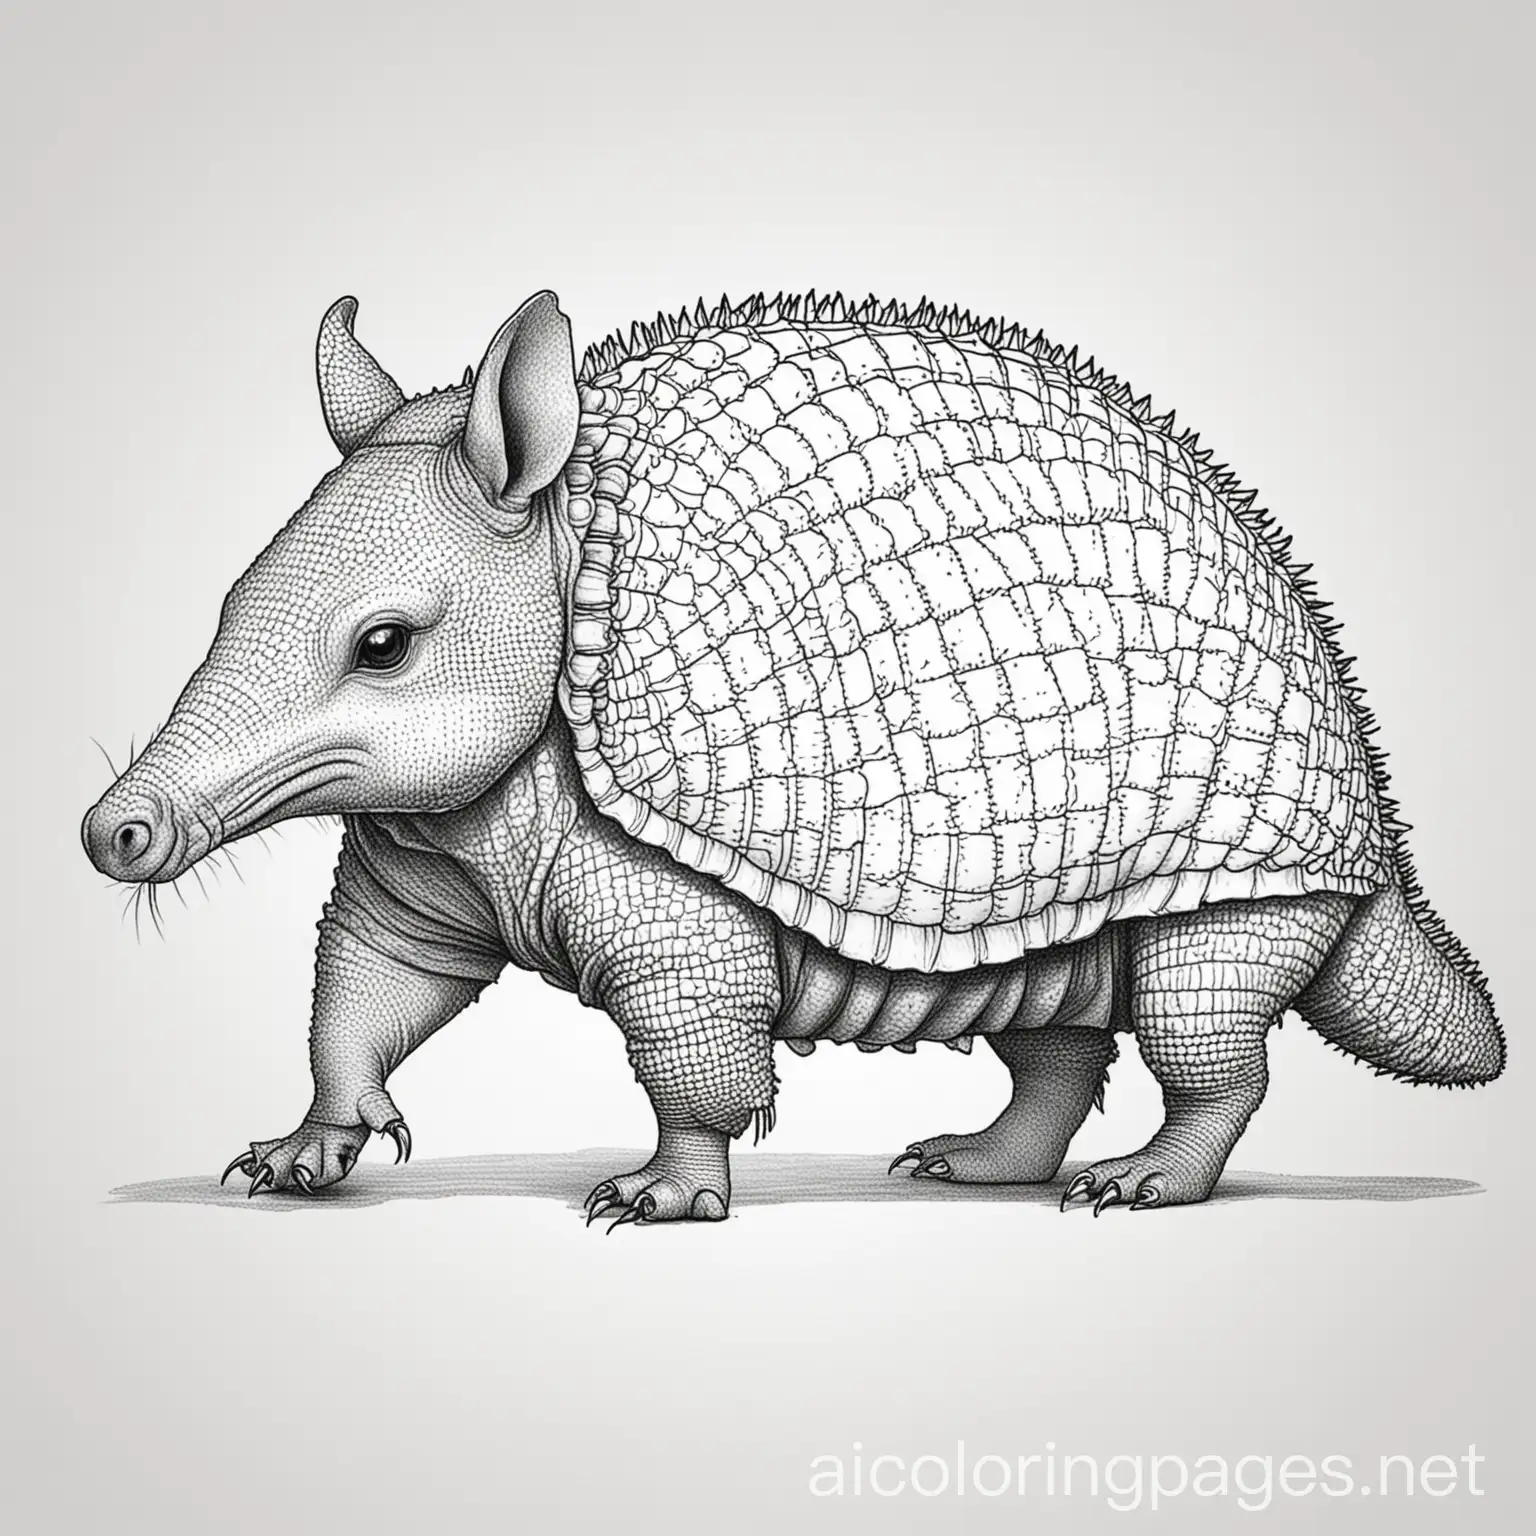 An armadillo, Coloring Page, black and white, line art, white background, Simplicity, Ample White Space.